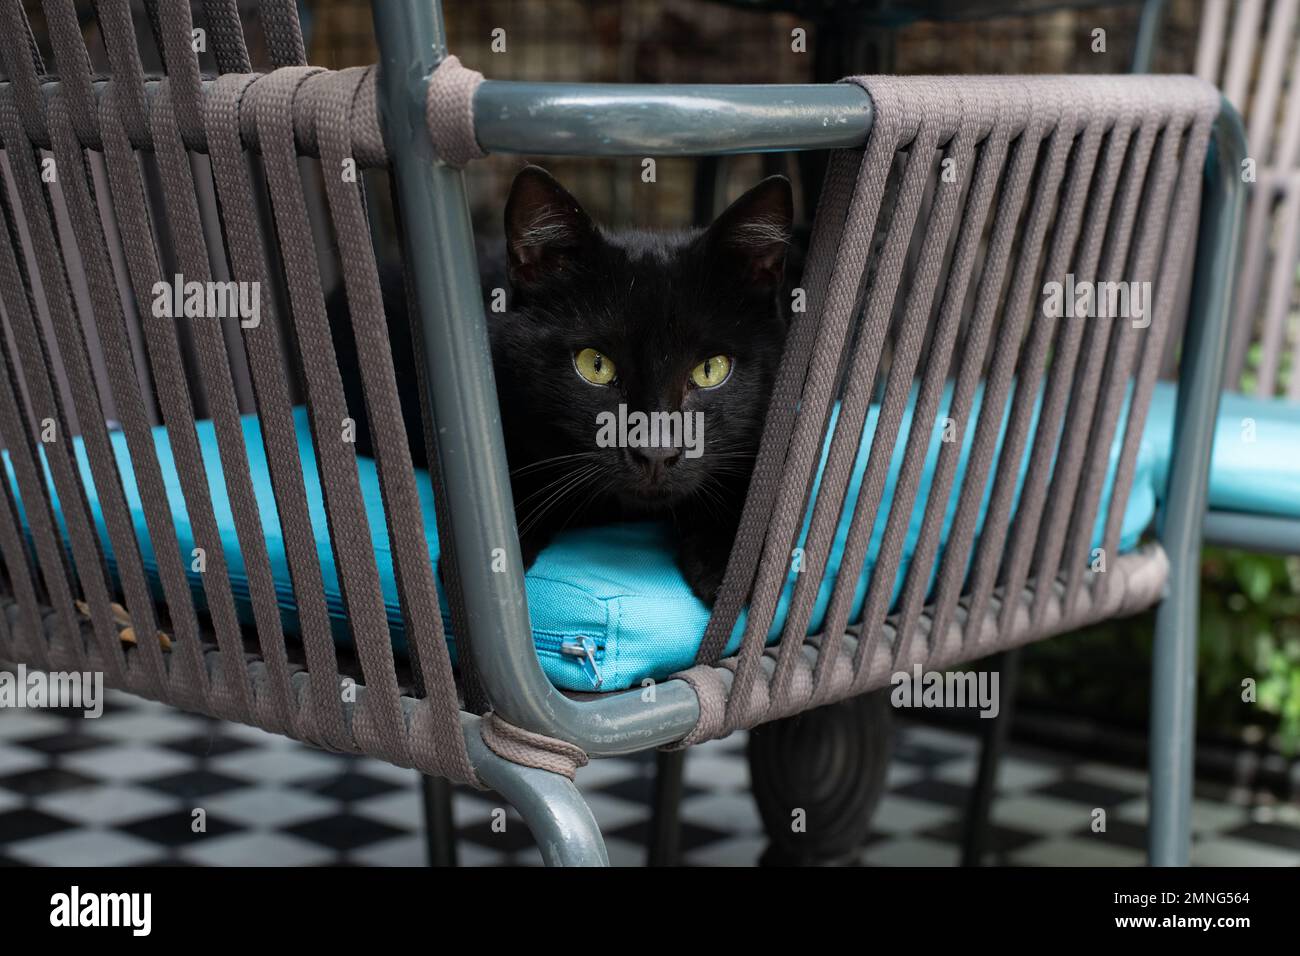 Black street cat sitting in cafe chair, Istanbul, Turkey Stock Photo